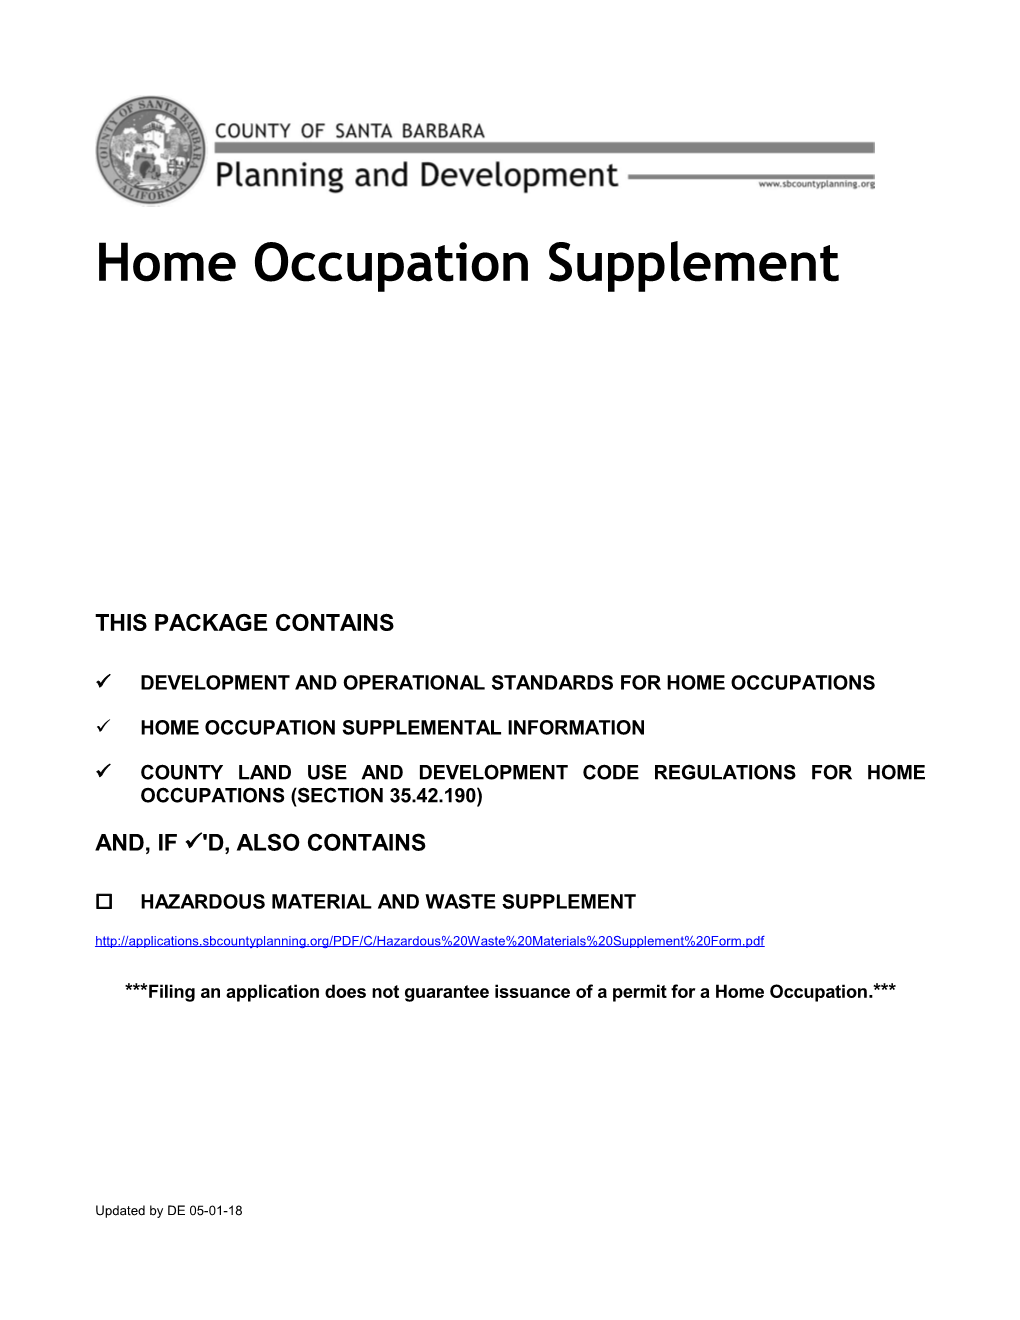 Development and Operational Standards for Home Occupations